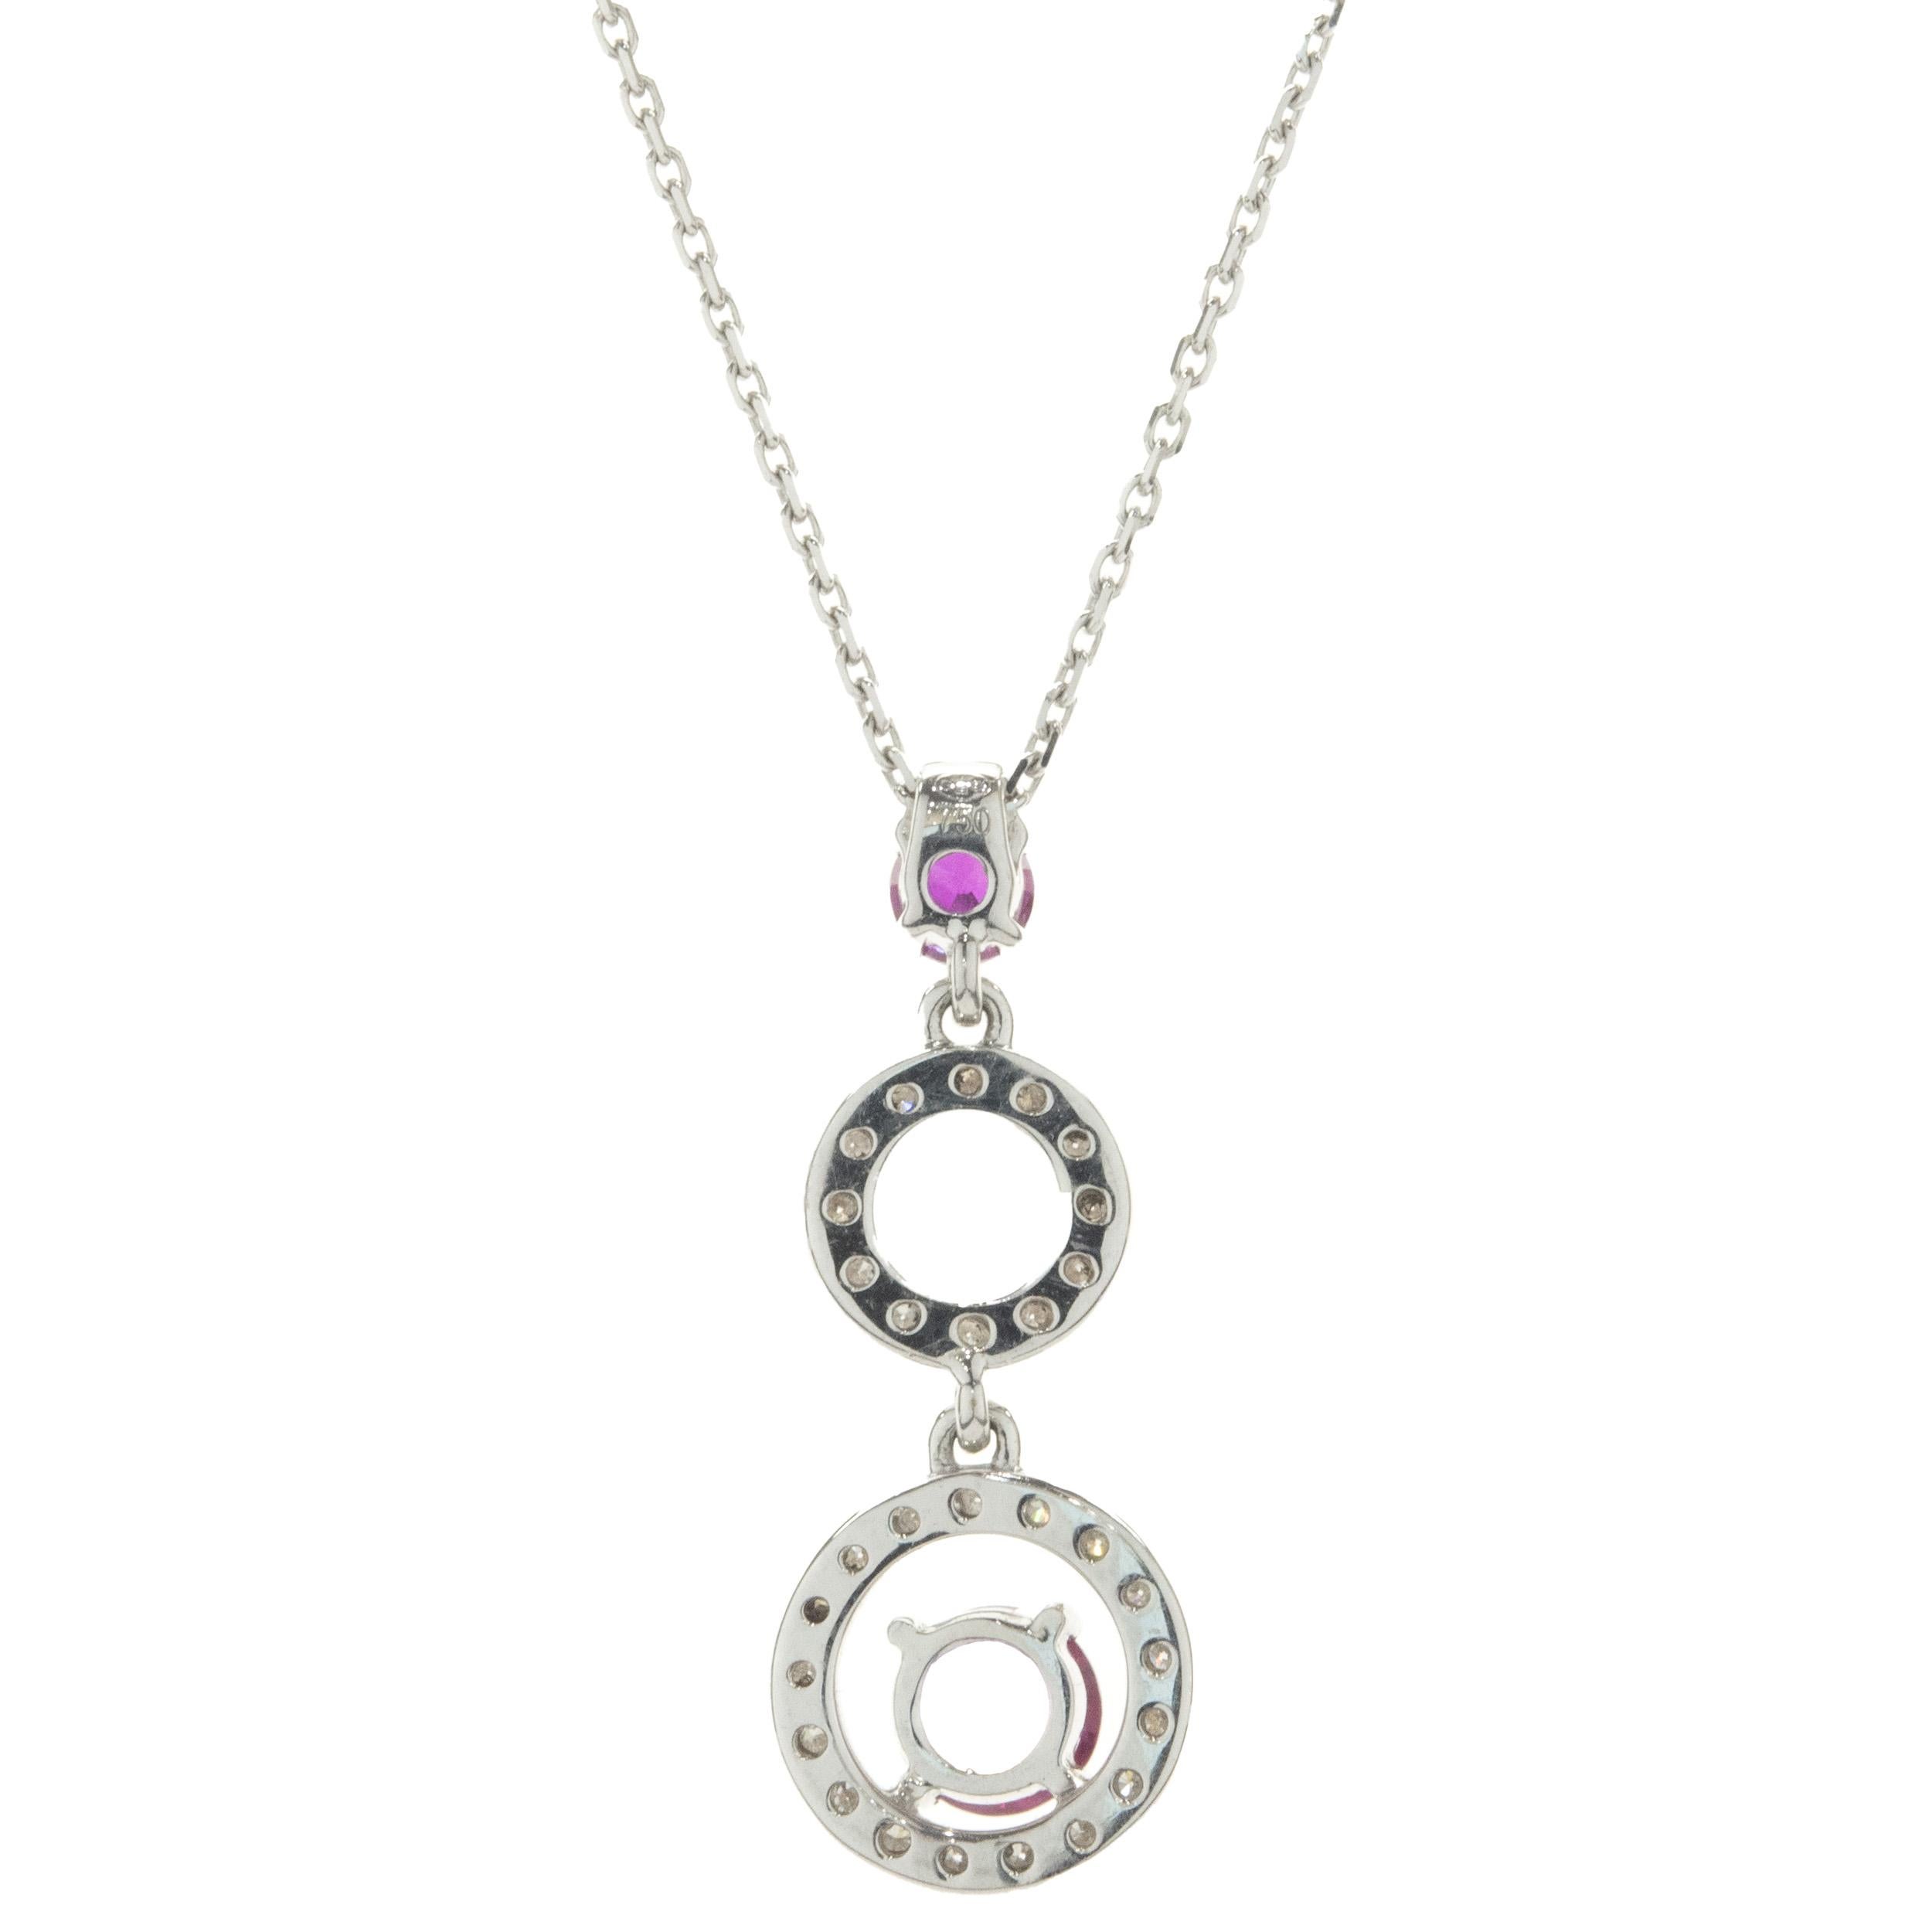 Designer: custom 
Material: 18K white gold
Diamond:  round brilliant cut = 0.45cttw
Color: G
Clarity: SI1
Dimensions: necklace measures 18-inches long 
Weight: 4.23 grams